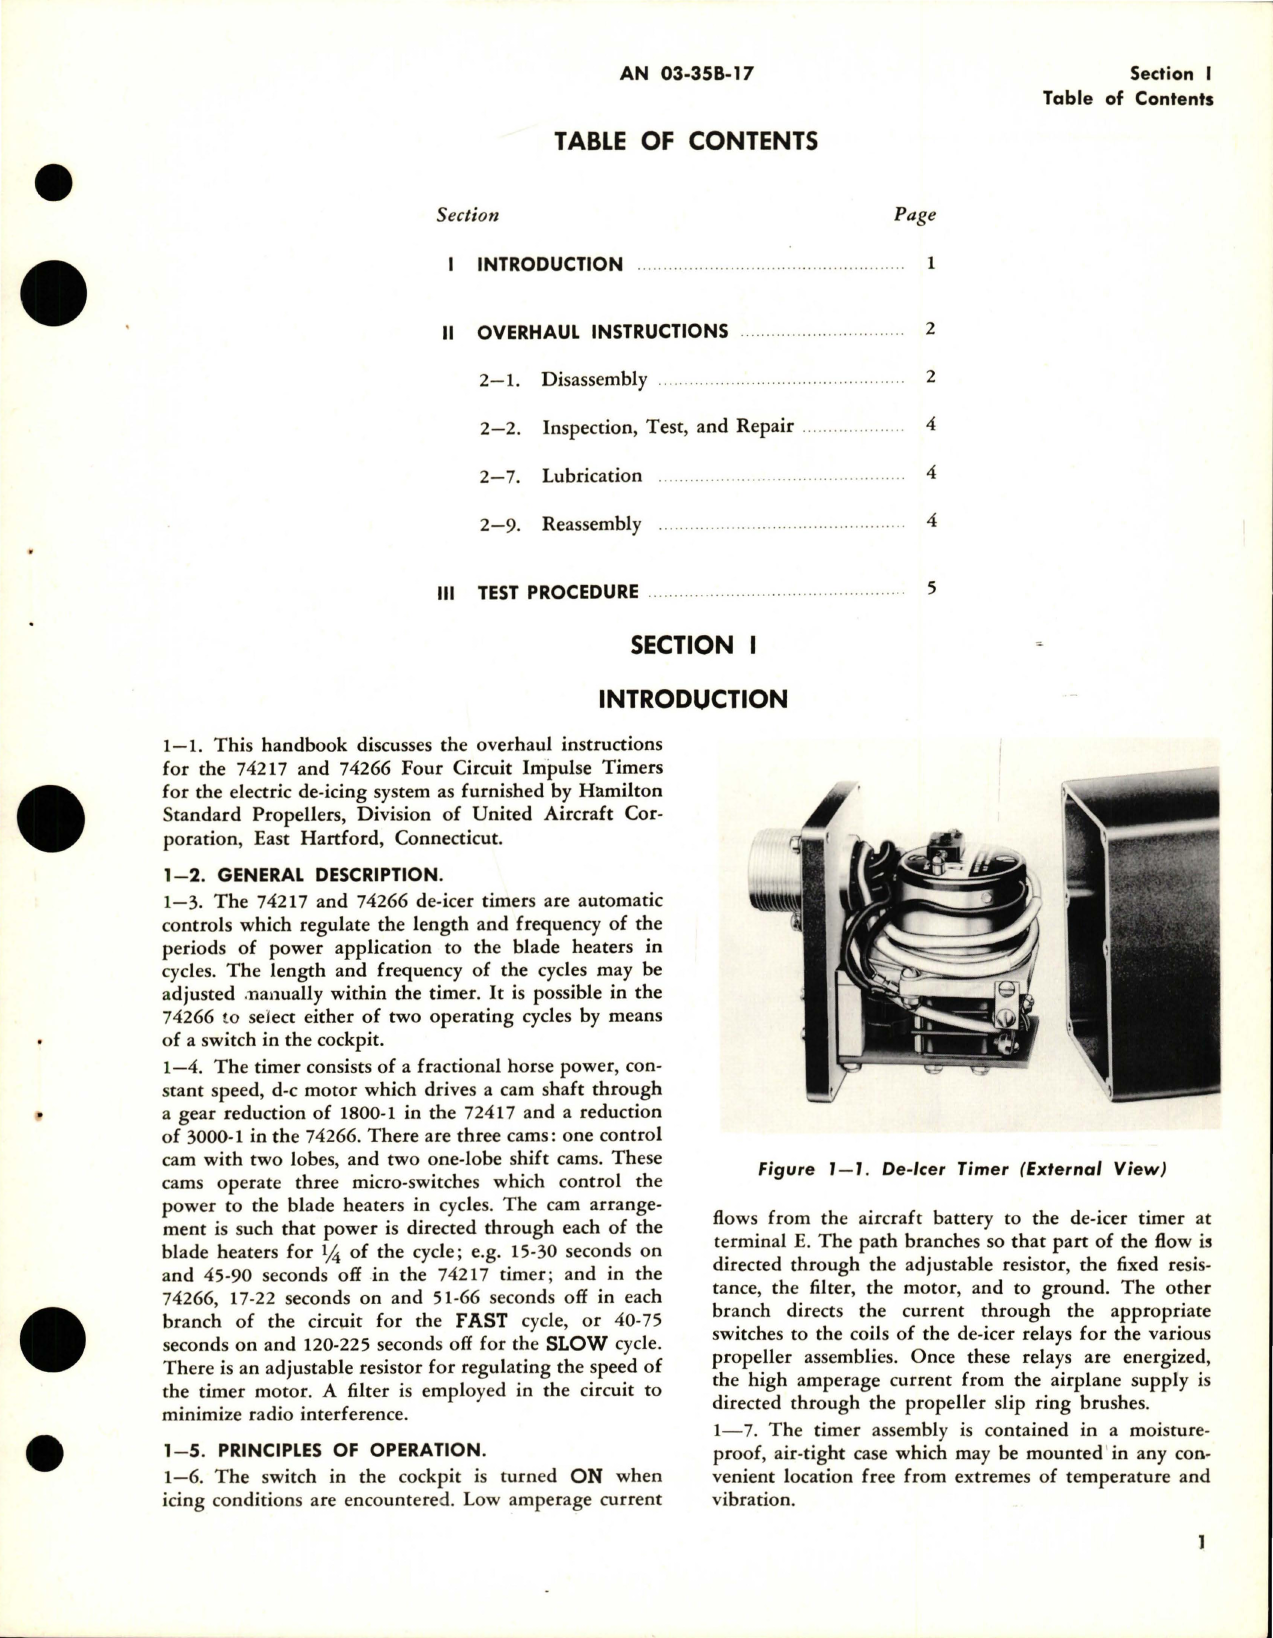 Sample page 5 from AirCorps Library document: Overhaul Instructions for De-Icer Timers - Models 74217, 74266, 556989, 556990, and 556991